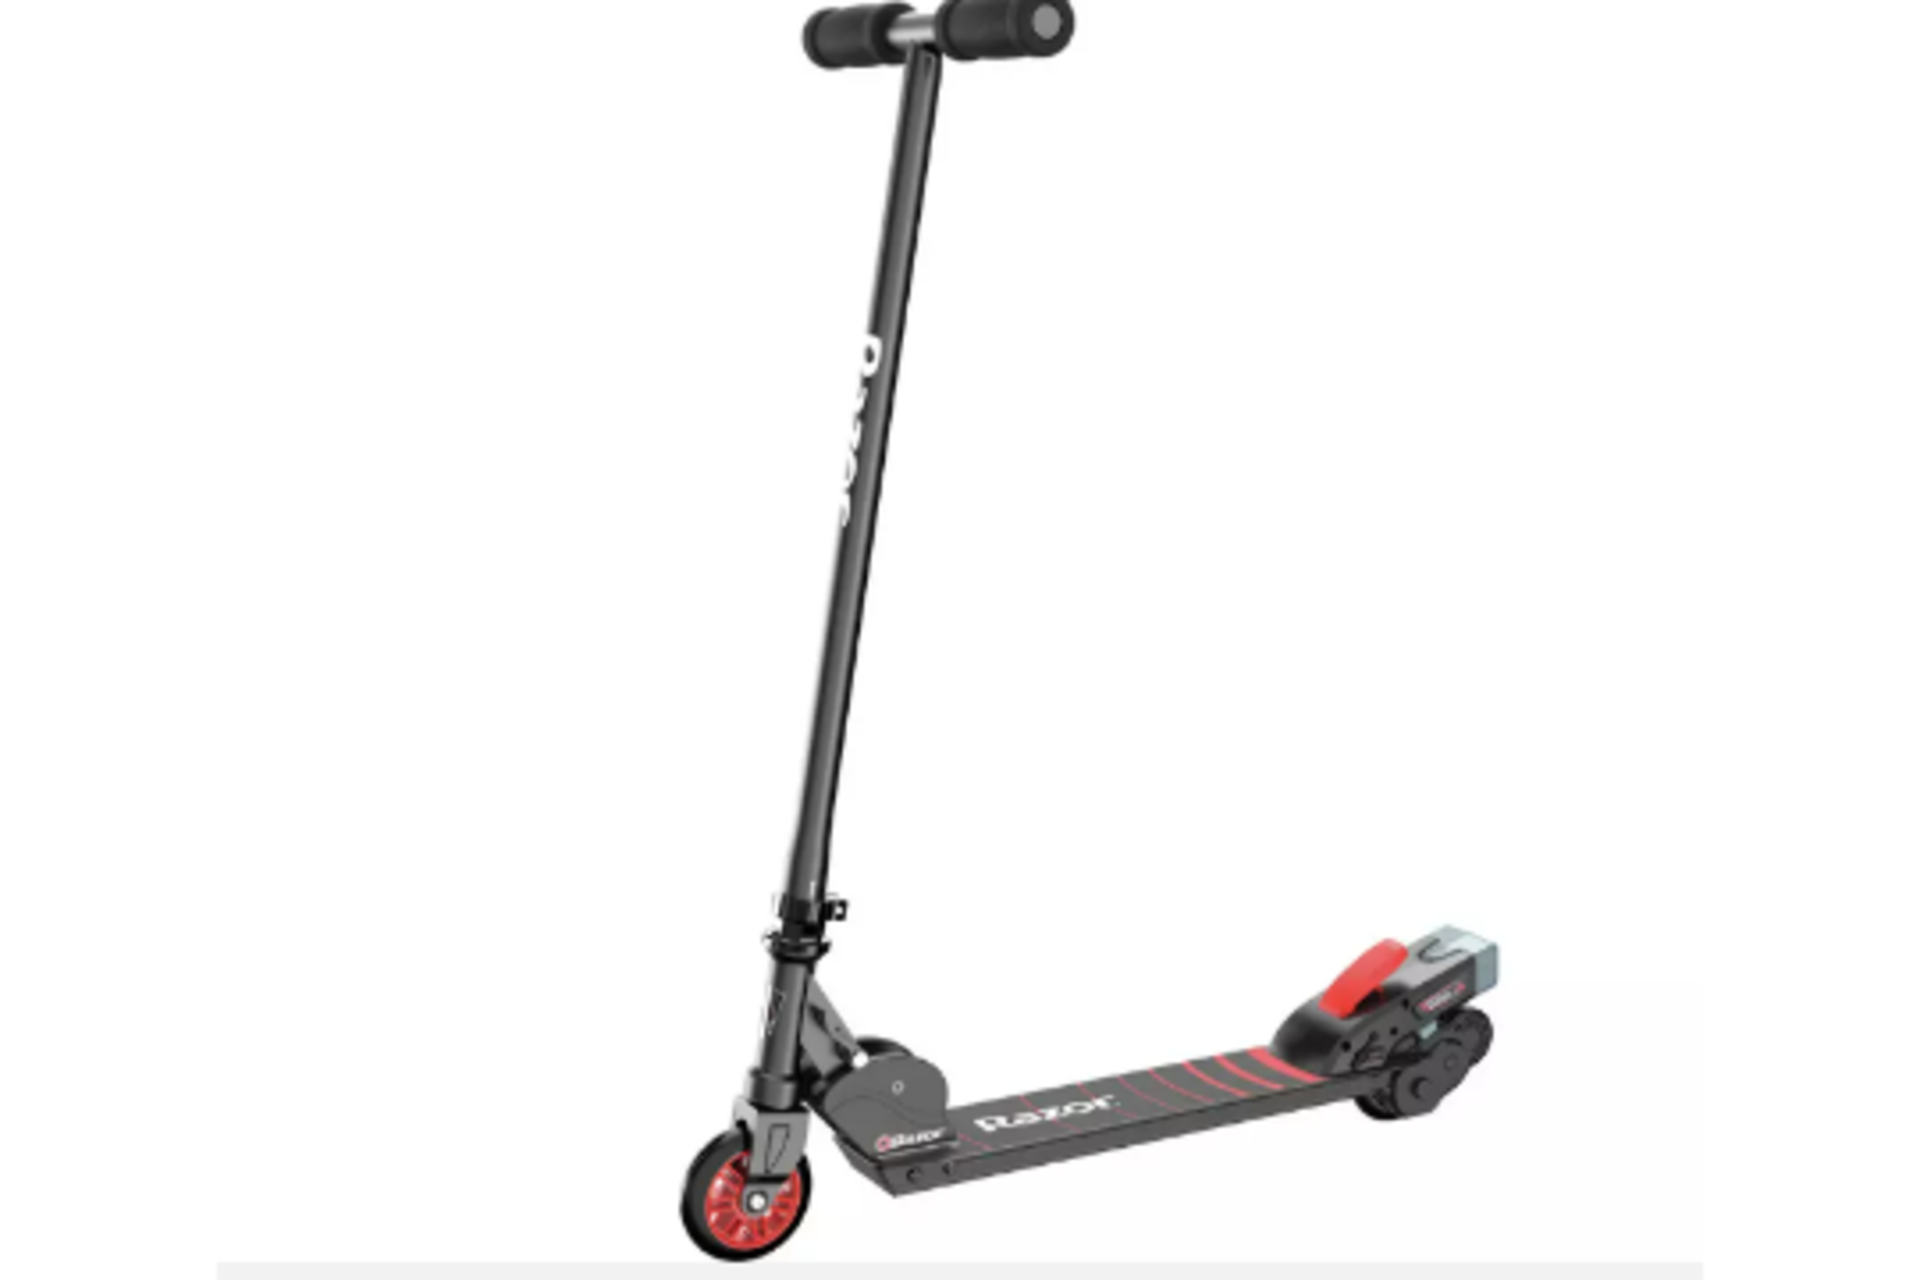 (ex11)Razor Turbo A Black Label Electric Scooter RRP £175.00. Simply step on and kick off to